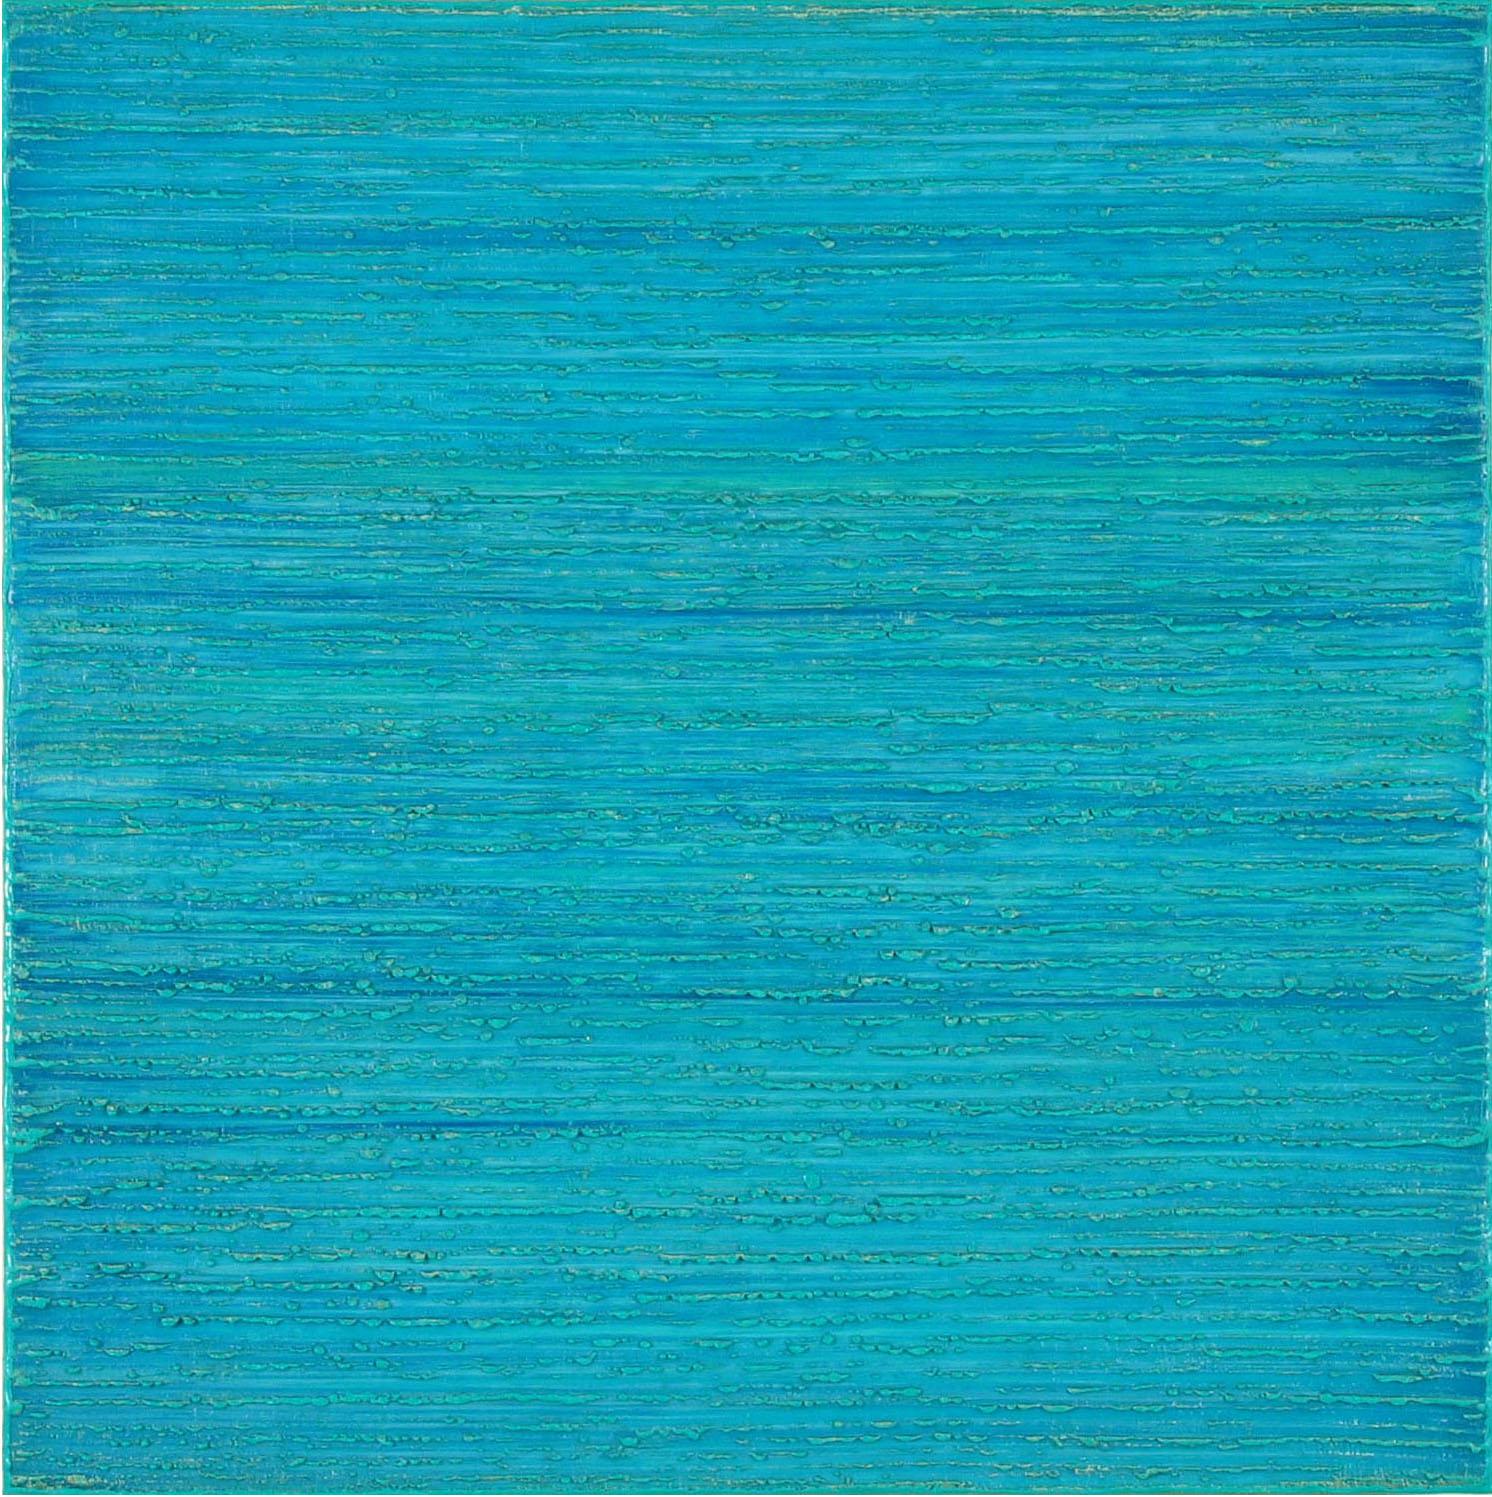 Silk Road 414, Bright Turquoise Blue, Teal Color Field Square Encaustic - Painting by Joanne Mattera